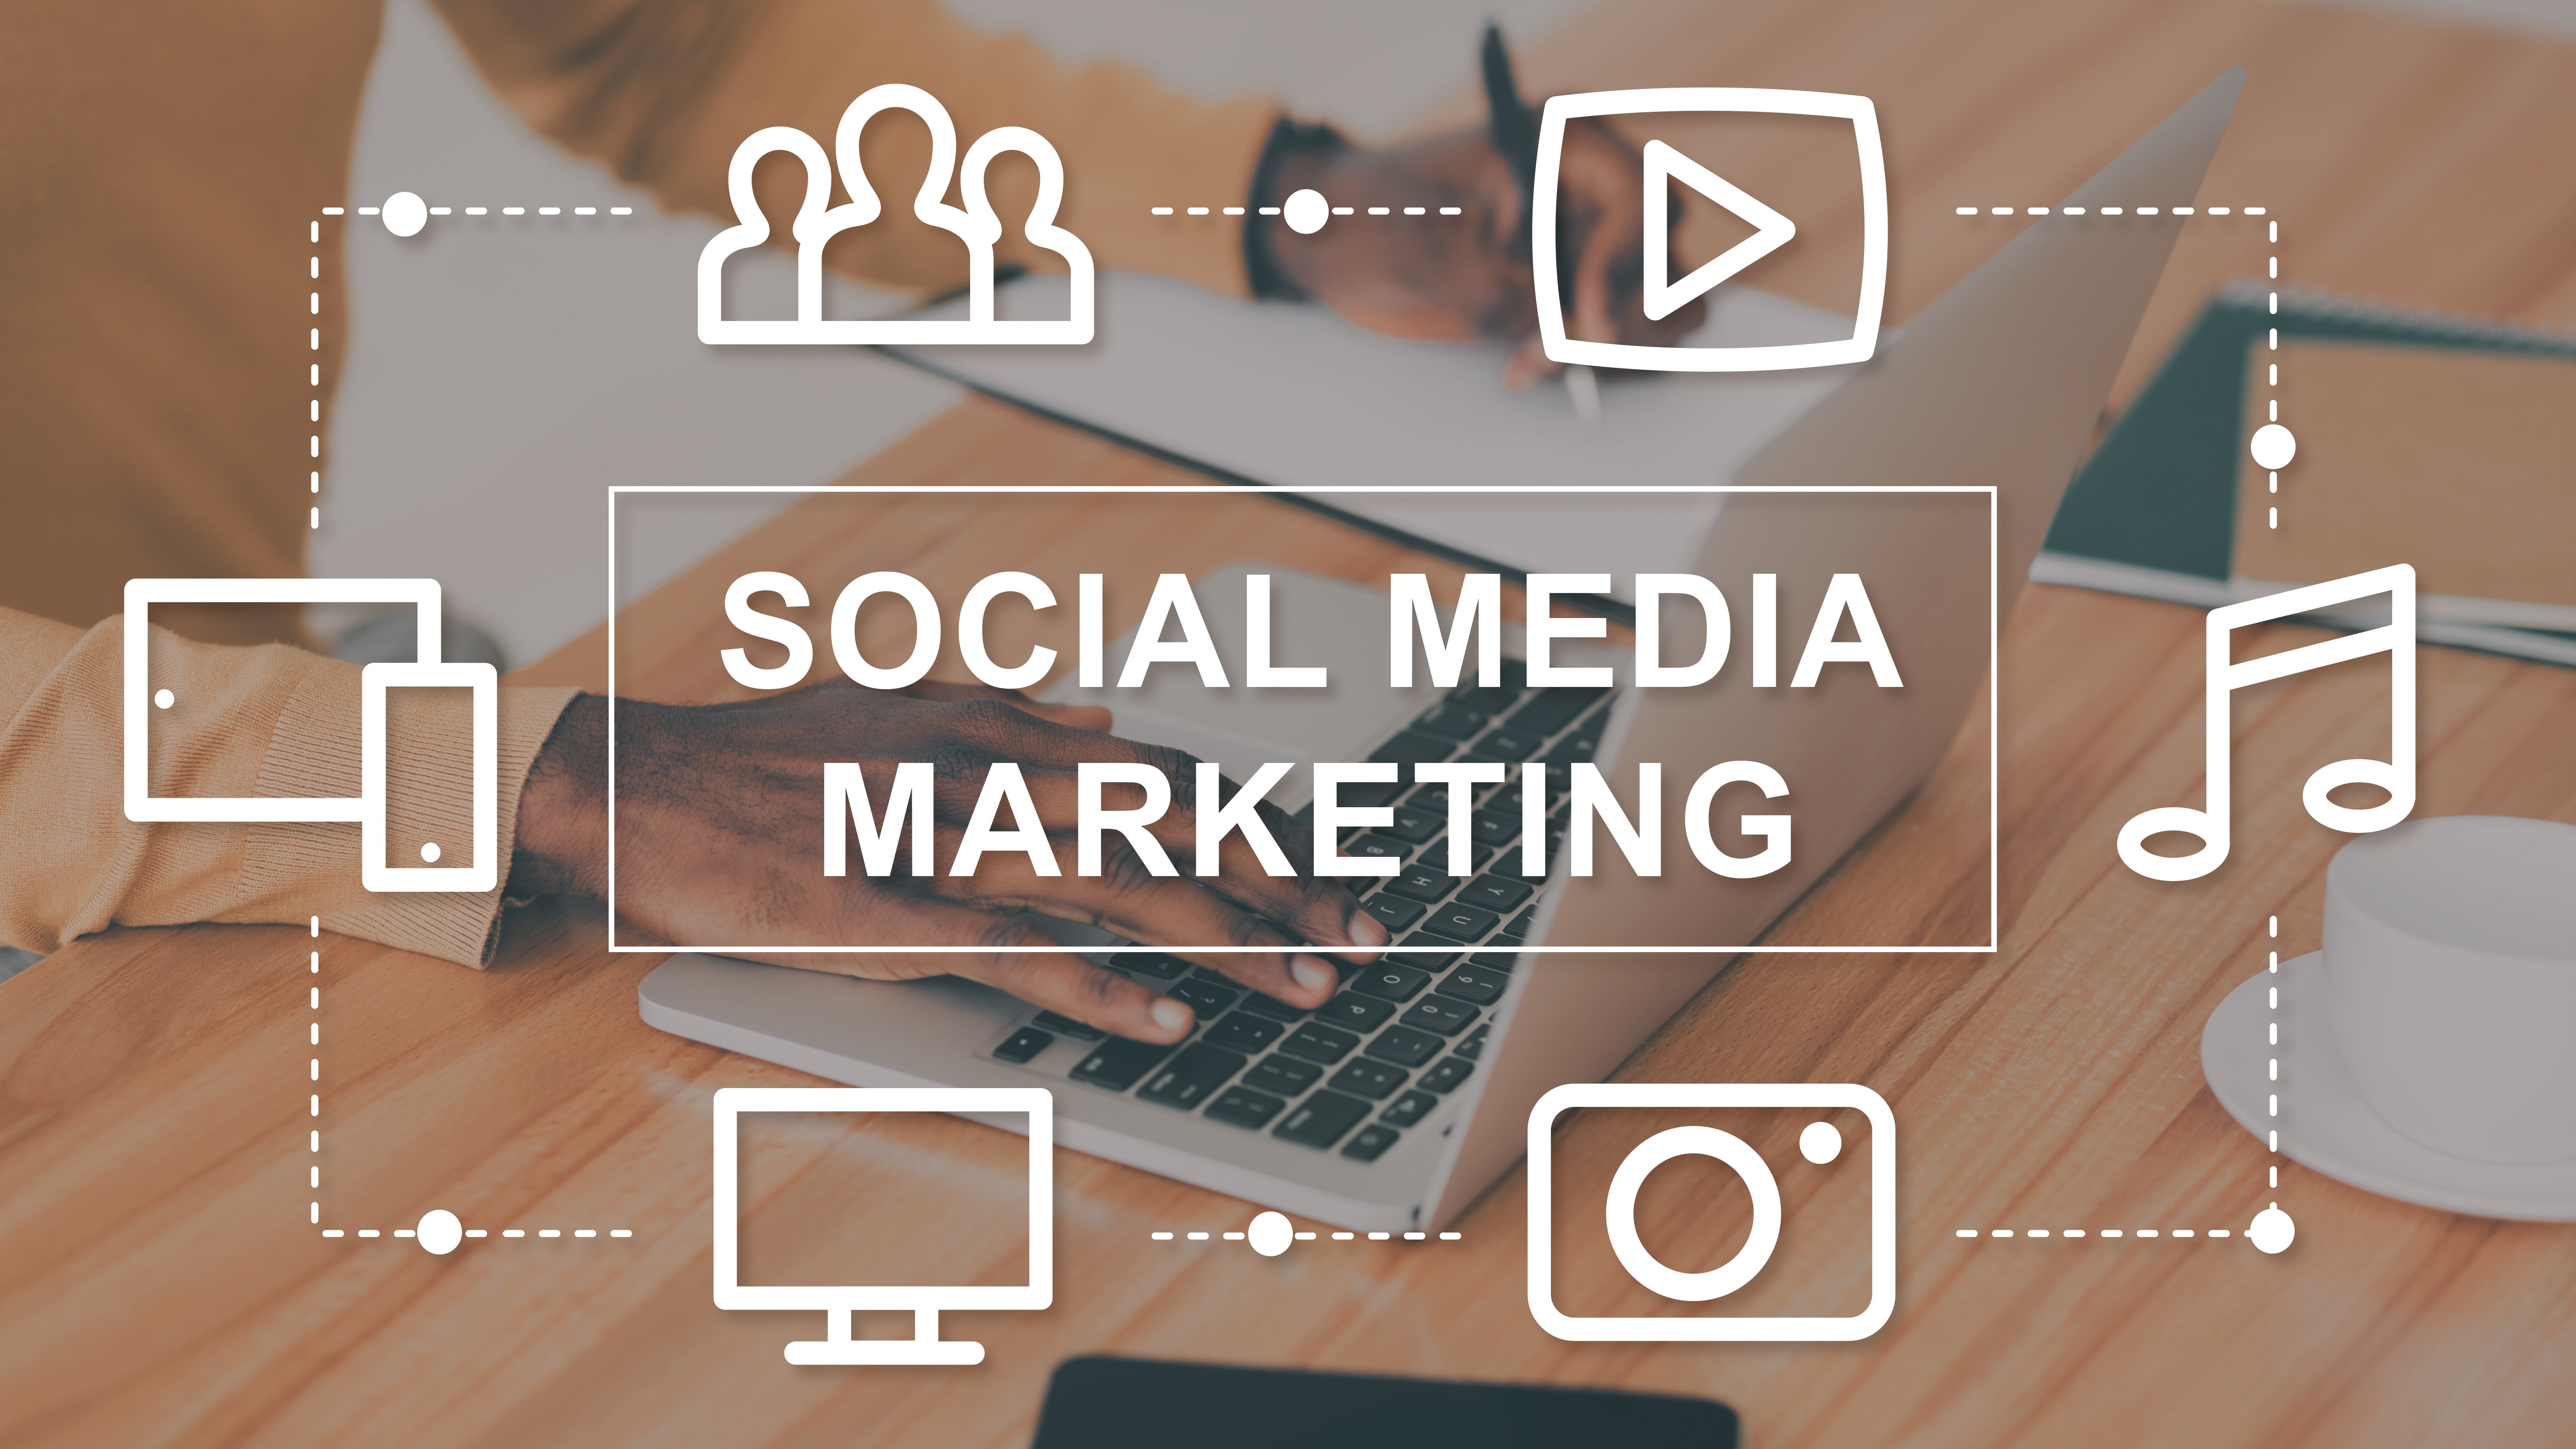 Top 9 Social Media Marketing Tips You Need to Know